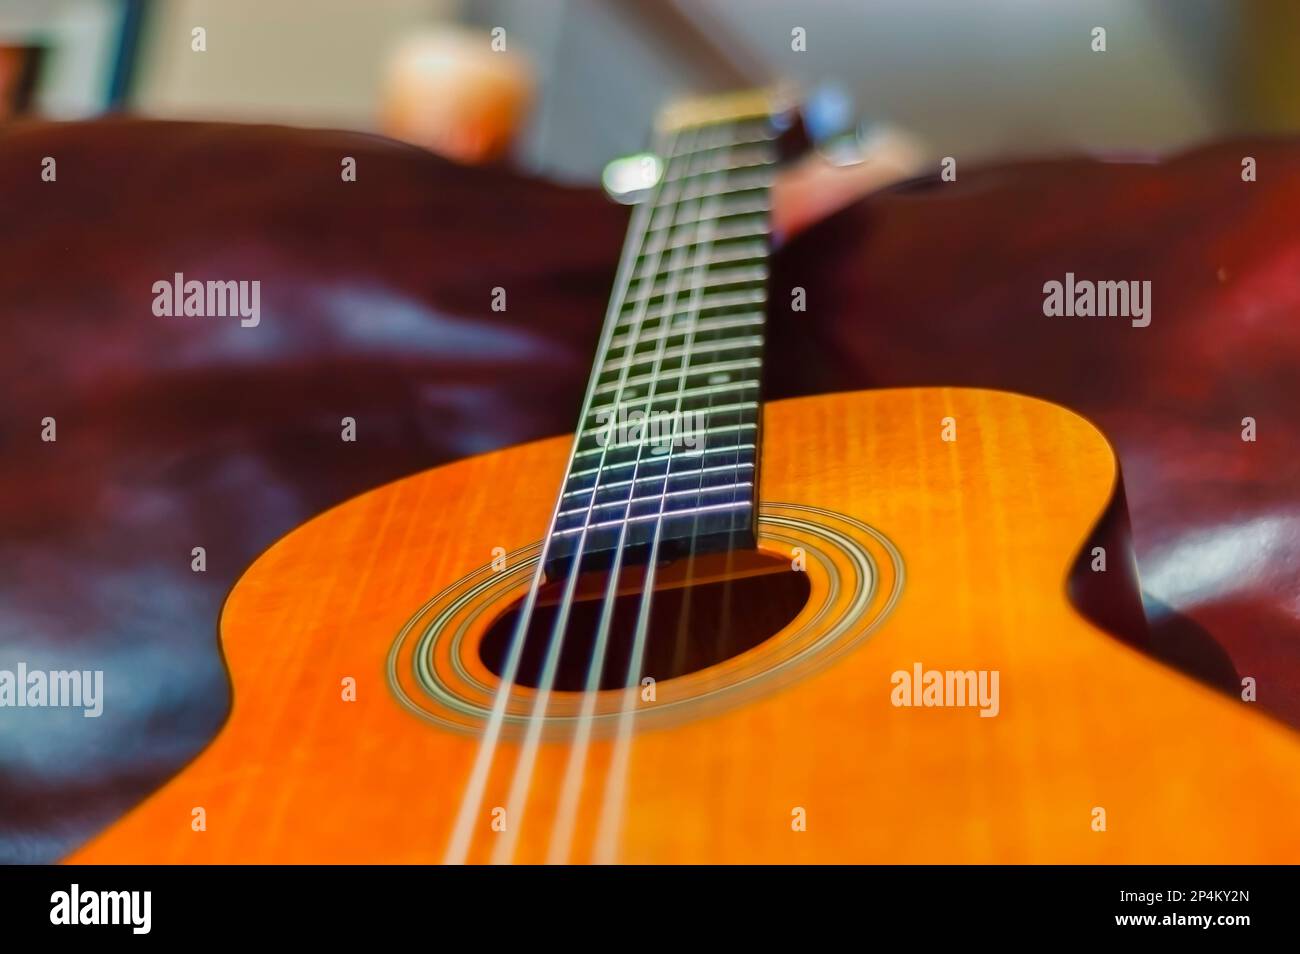 A close up of classical acoustic guitar with nylon strings, lying on a couch. Stock Photo